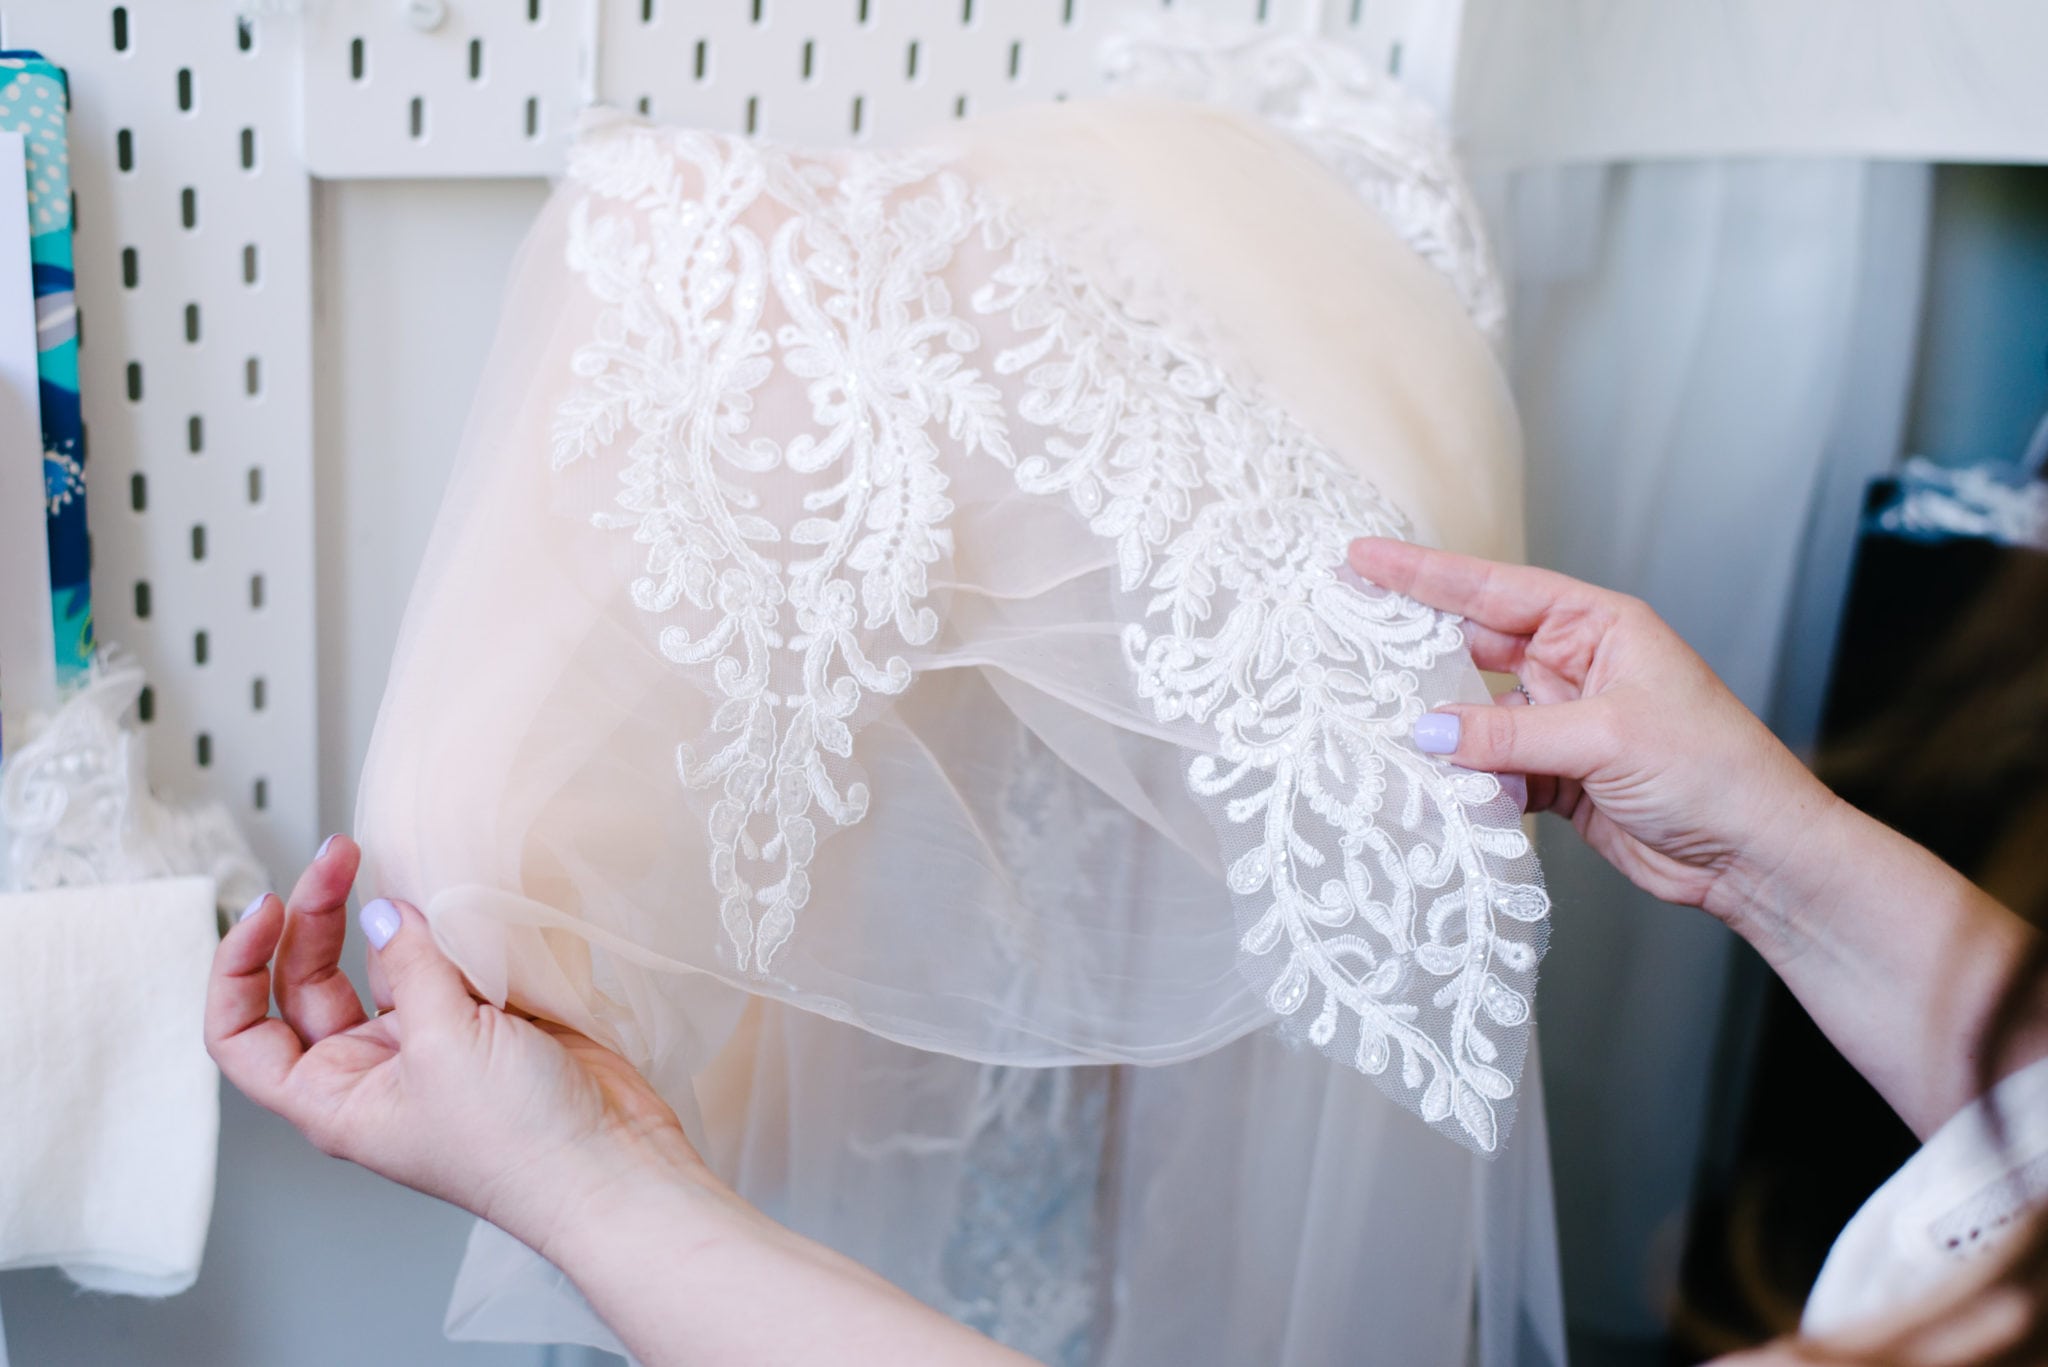 A person holds some wedding lace